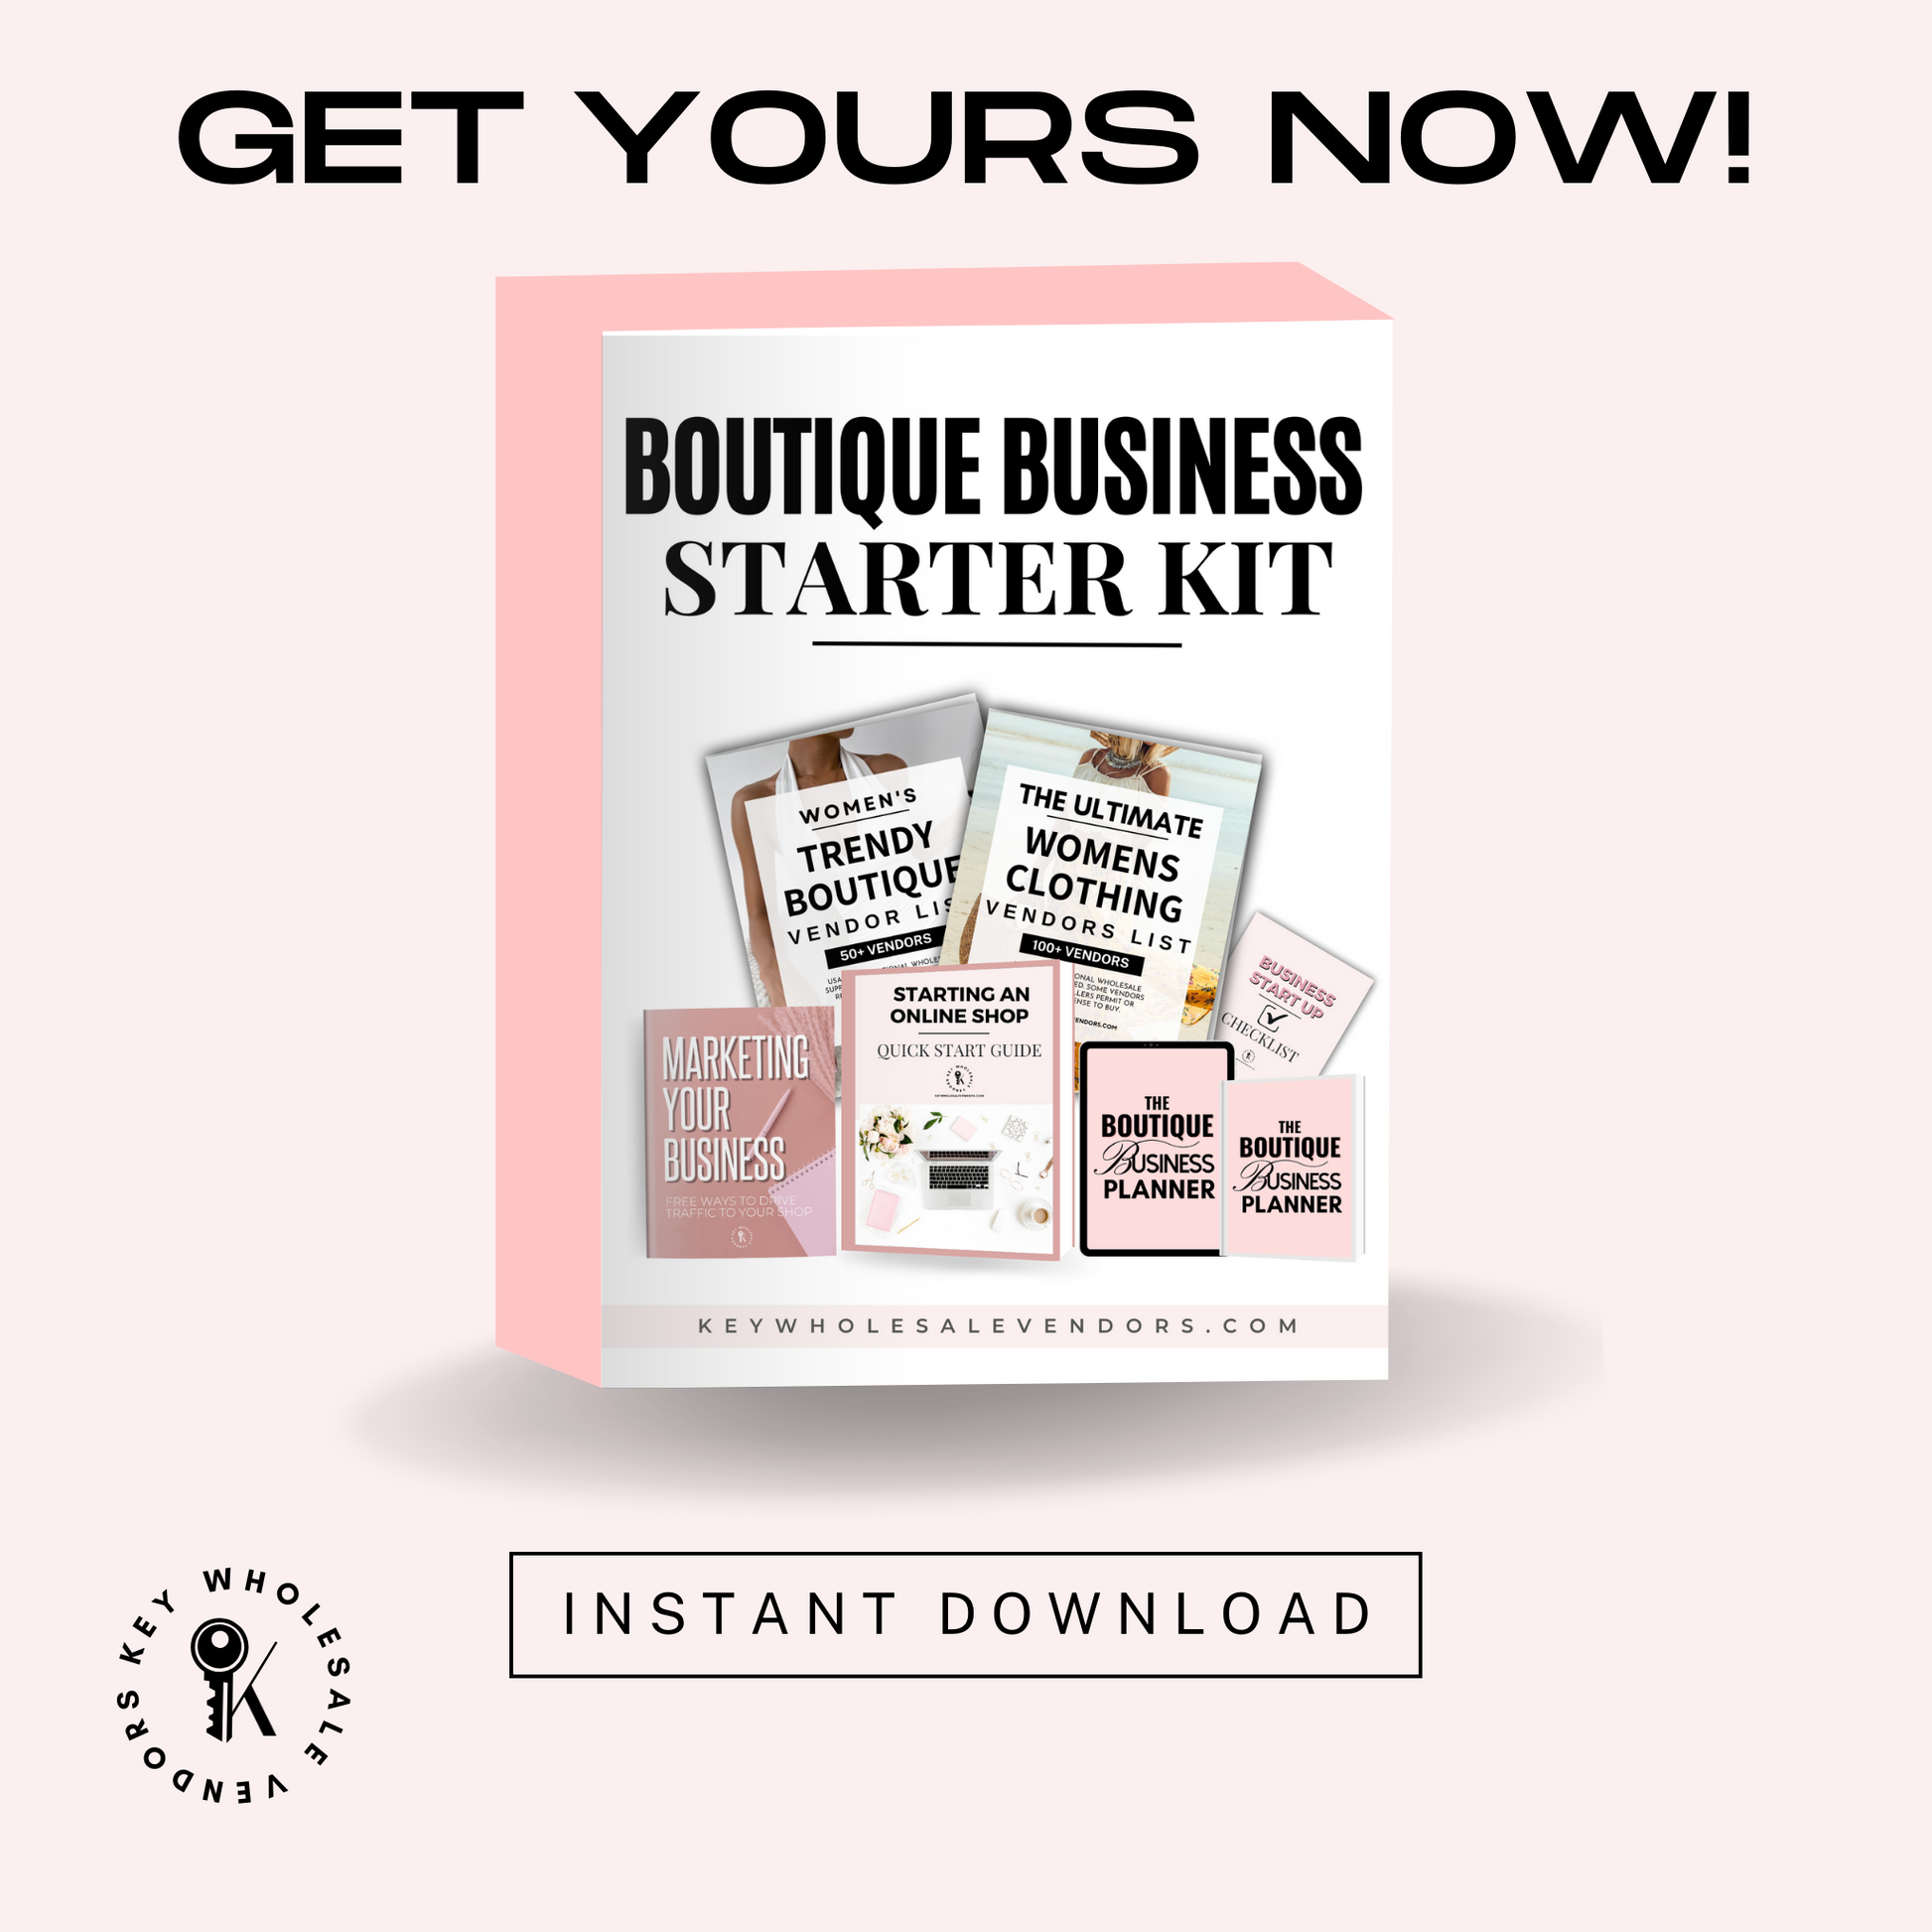 Starter Kits, Everything You Need To Make It Now!